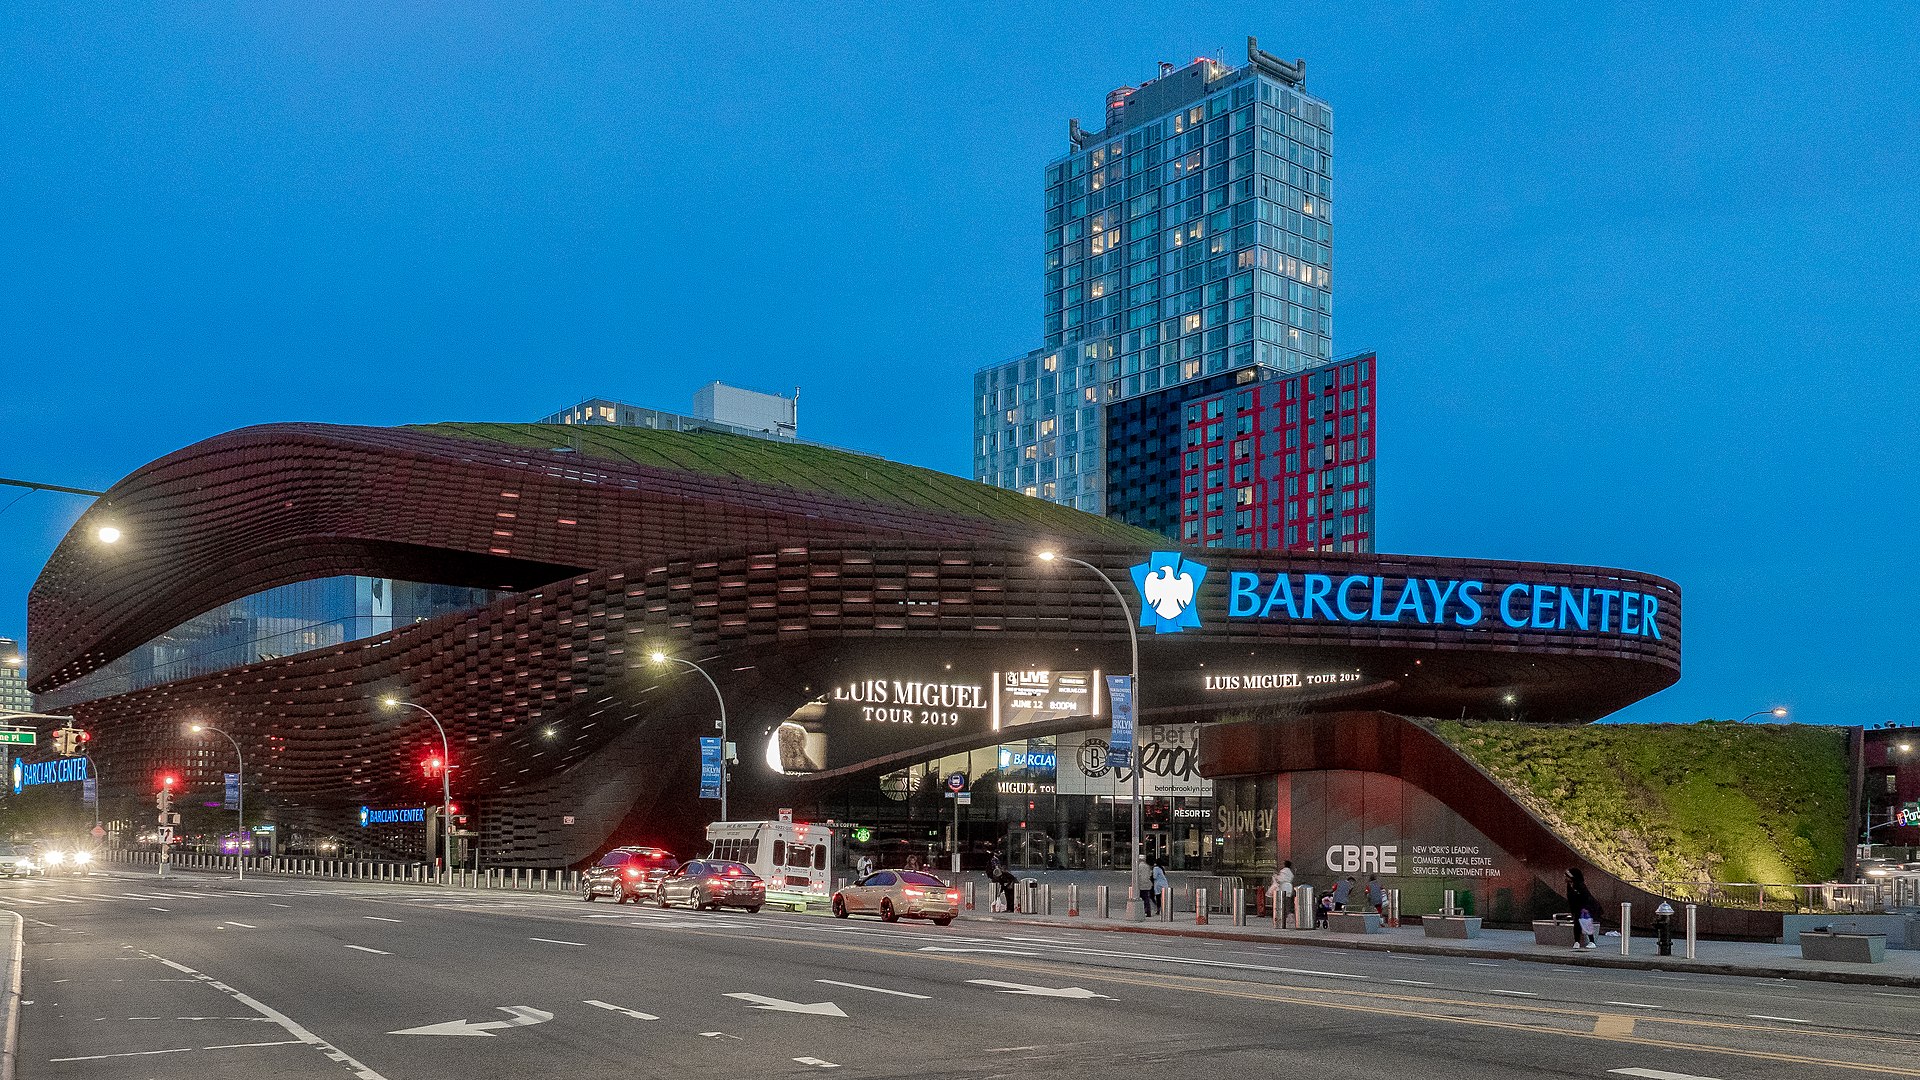 20 Innovative projects by SHoP Architects every Architect should know about - Barclays Center